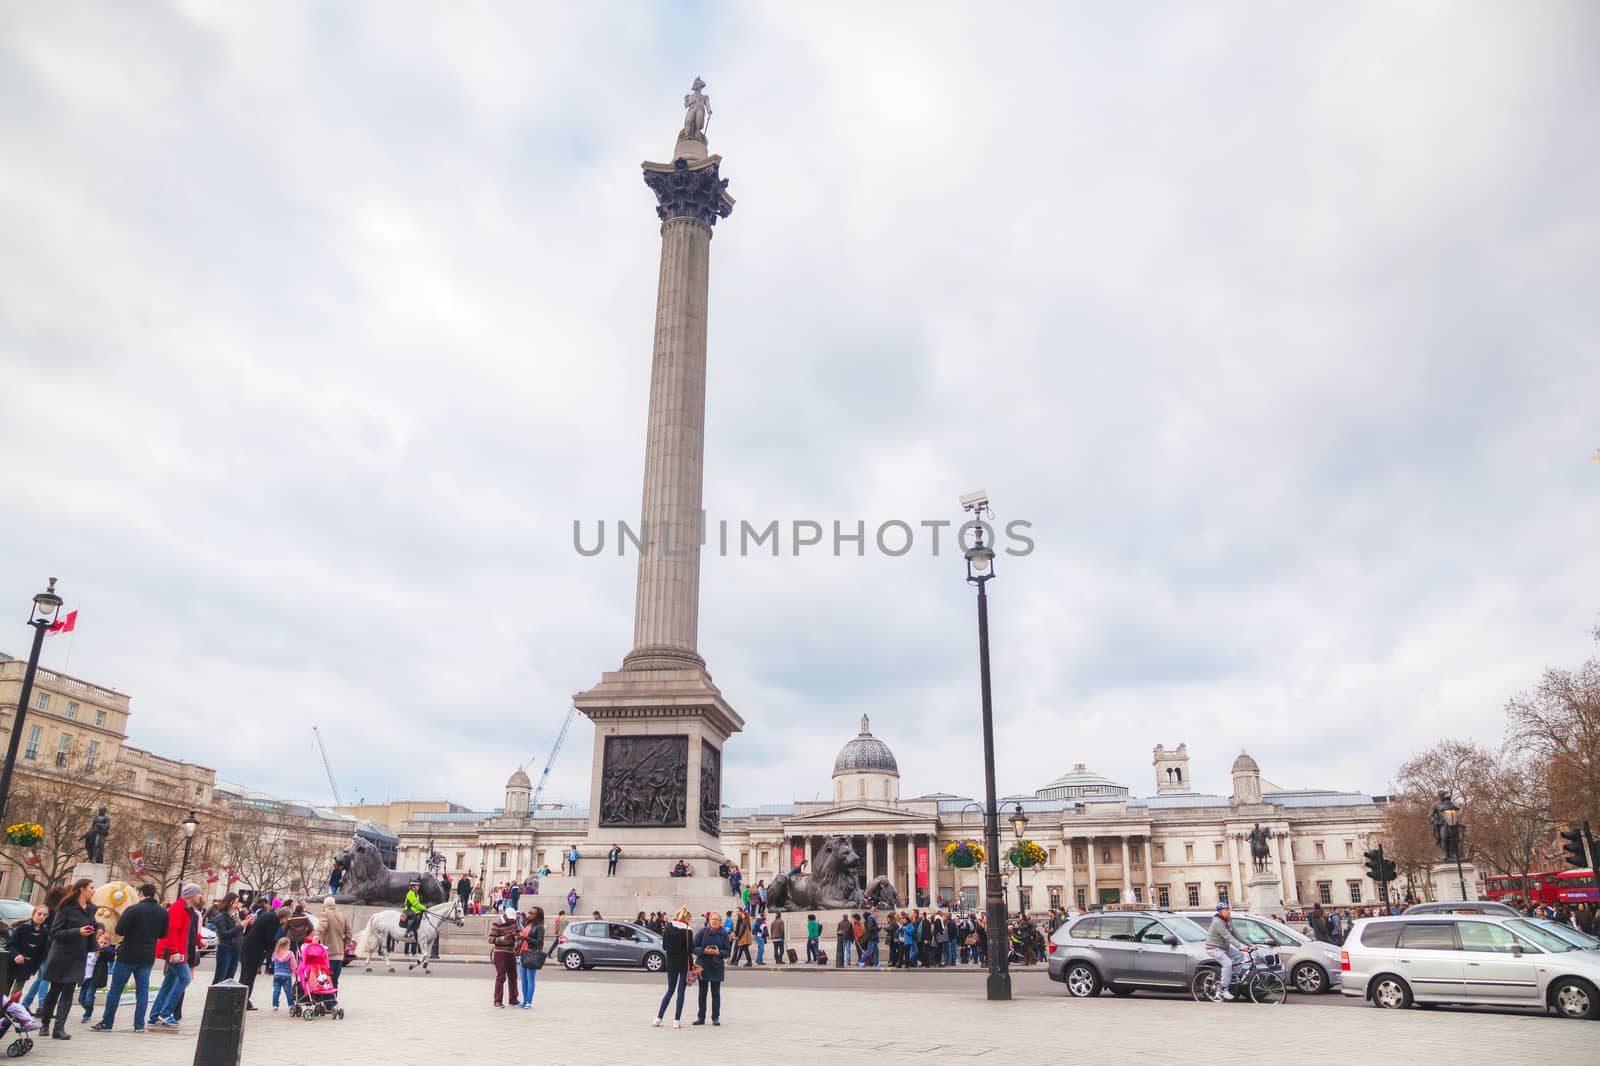 LONDON - APRIL 5: Trafalgar square with the Nelson's column on April 5, 2015 in London, UK. It's a public space and tourist attraction in central London, built around the area formerly known as Charing Cross.